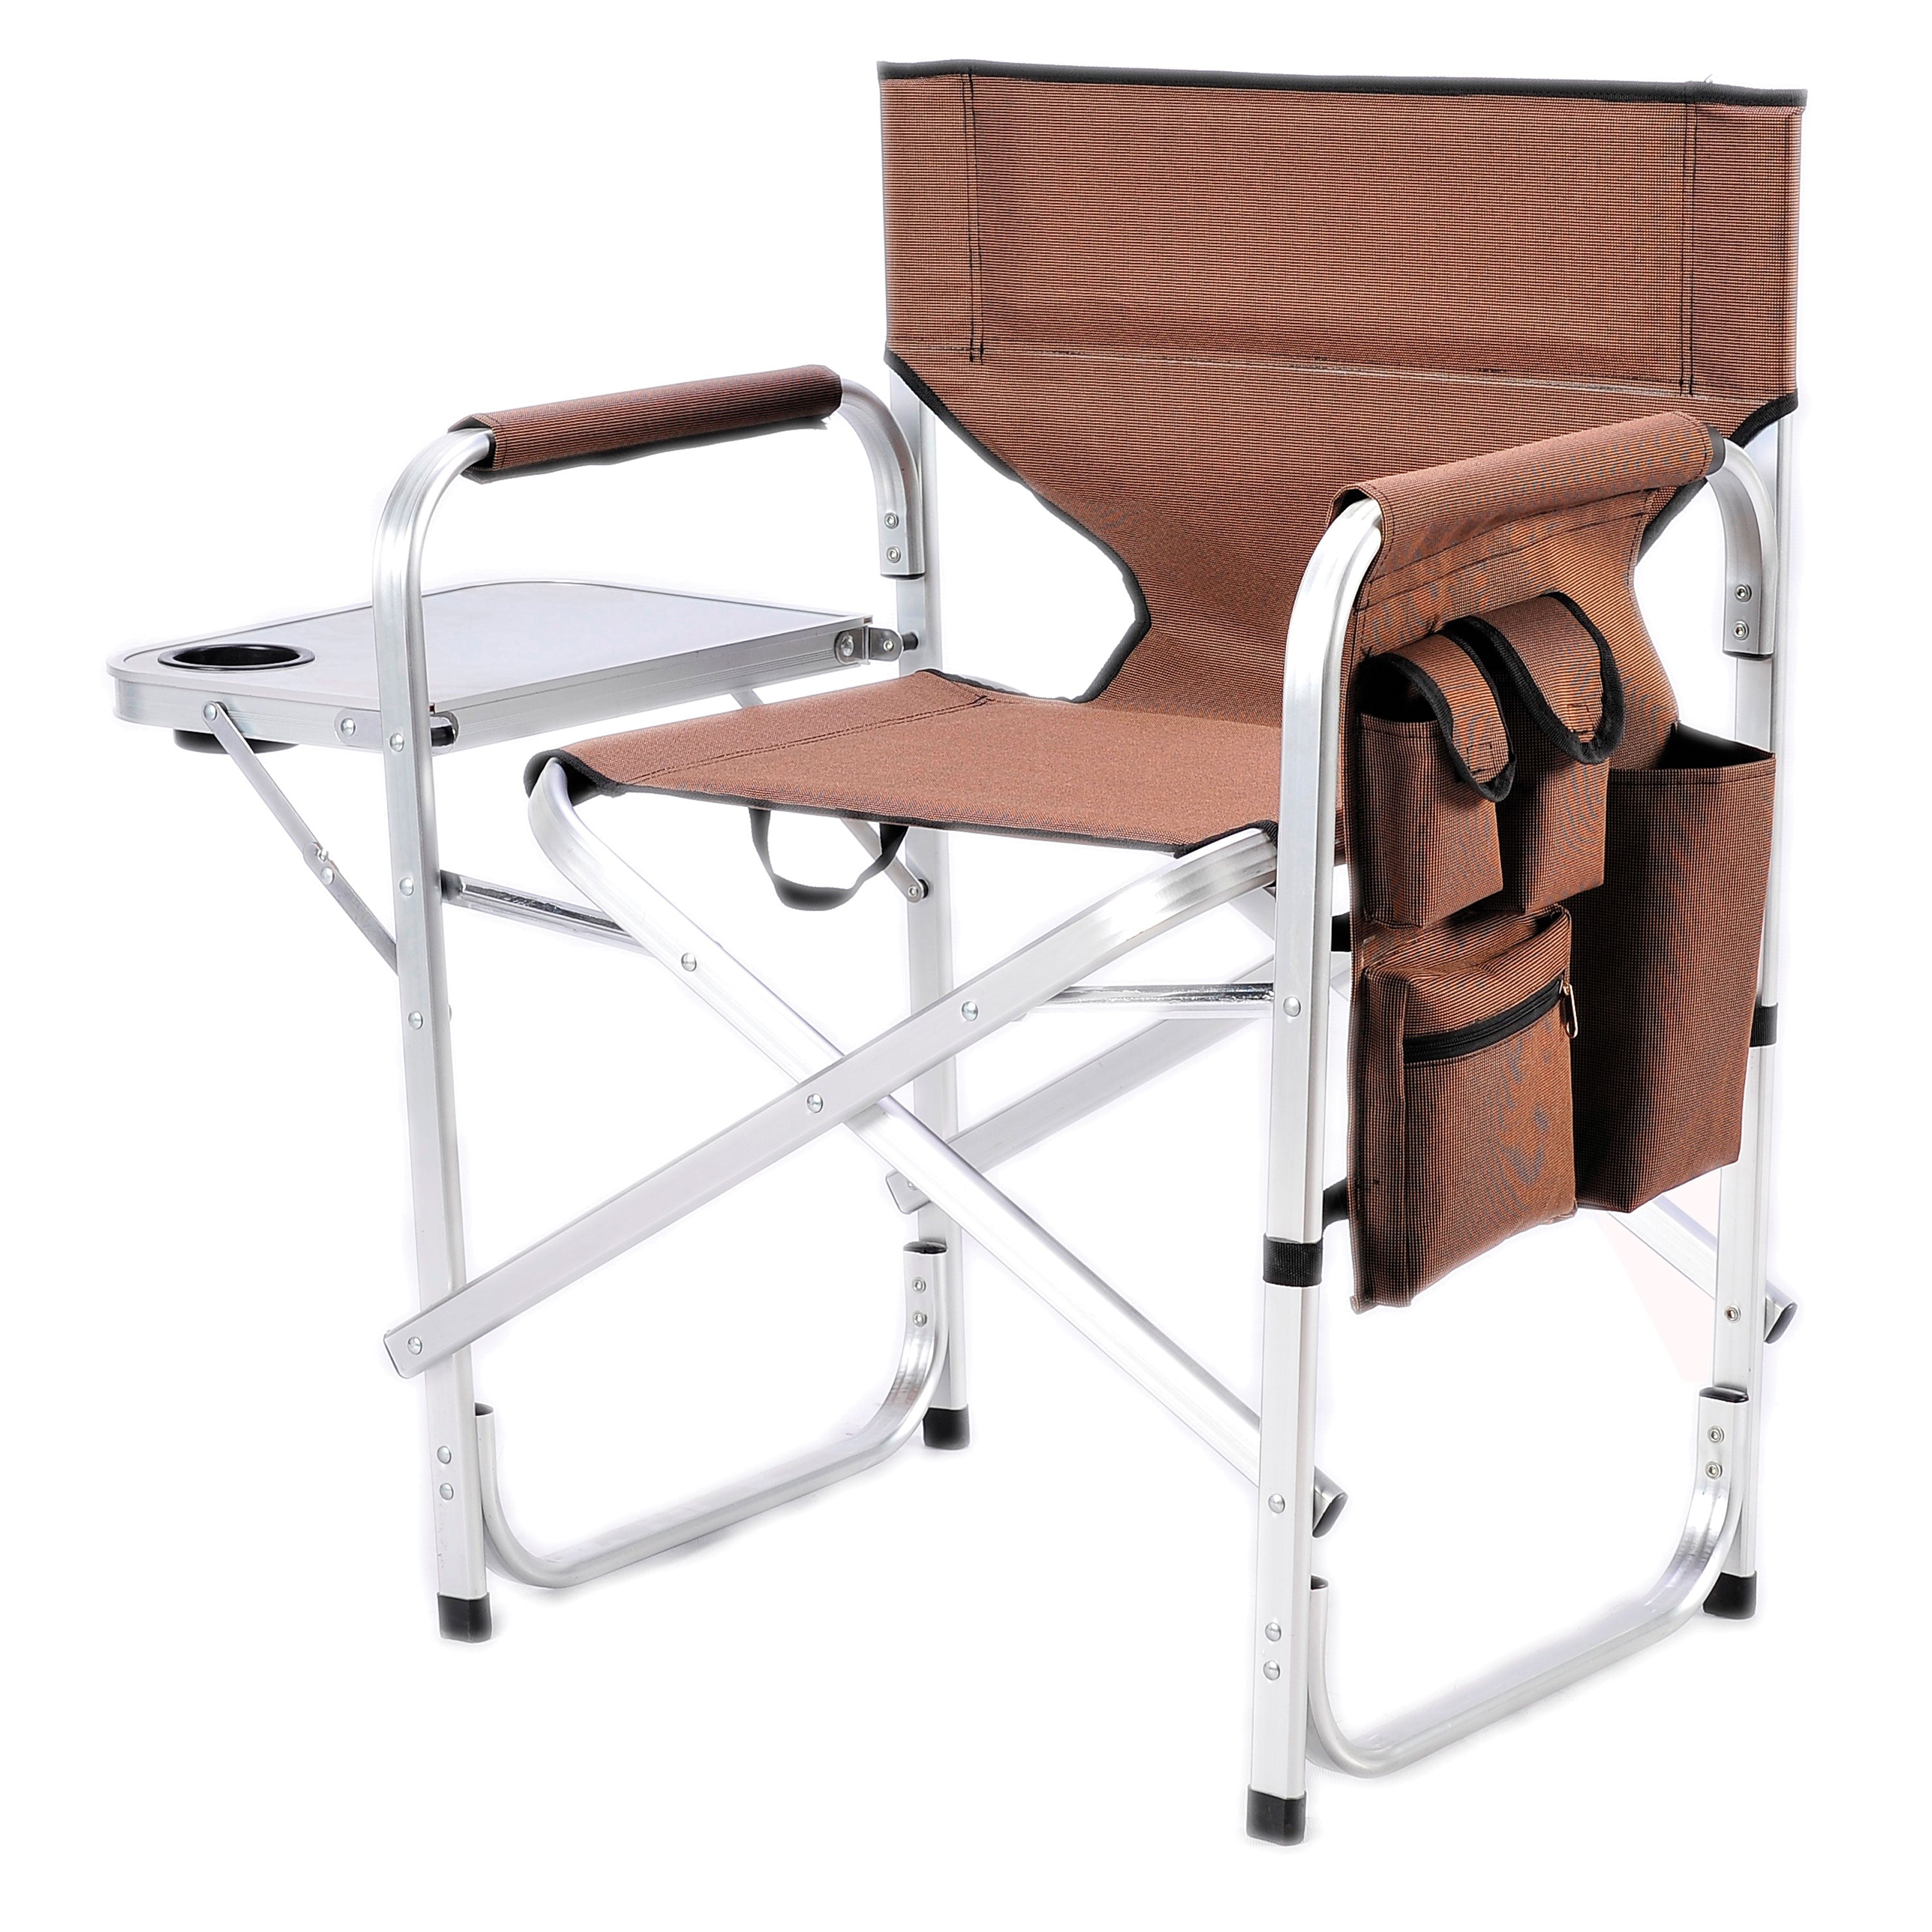 Ming's Mark SL-1204-BROWN Stylish Camping Folding Director Chair - Brown